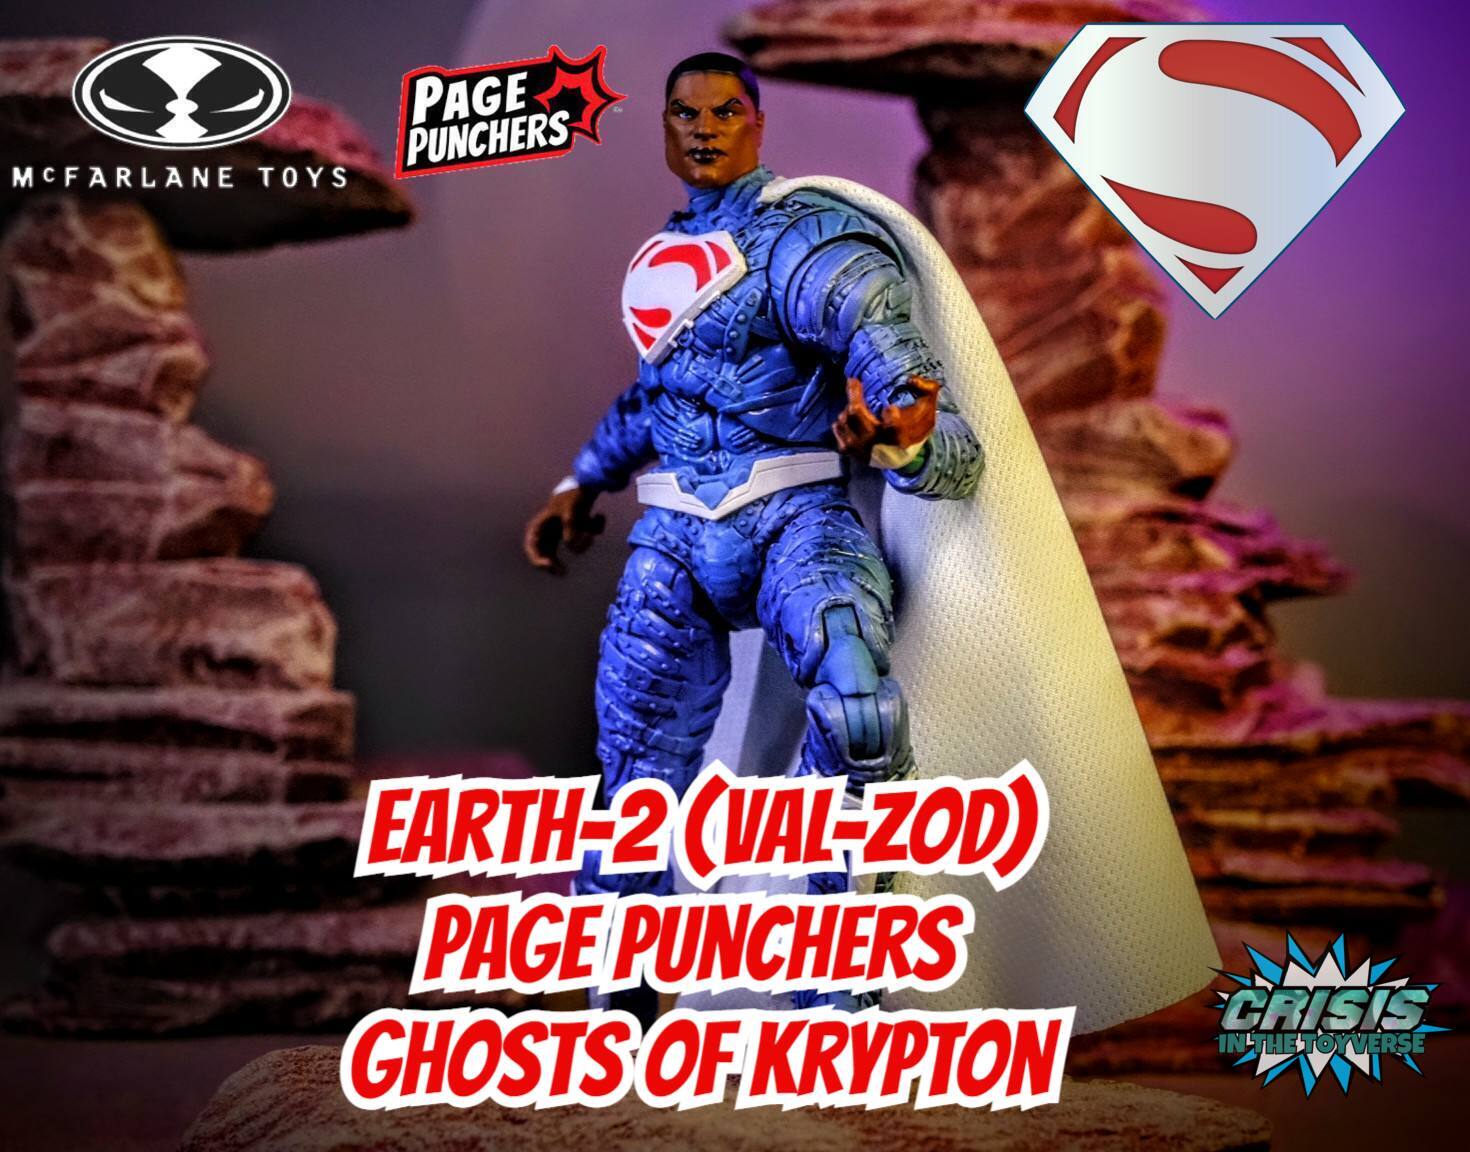 McFarlane Toys Ghosts of Krypton Page Punchers Earth-2 Val-Zod Superman Figure Review